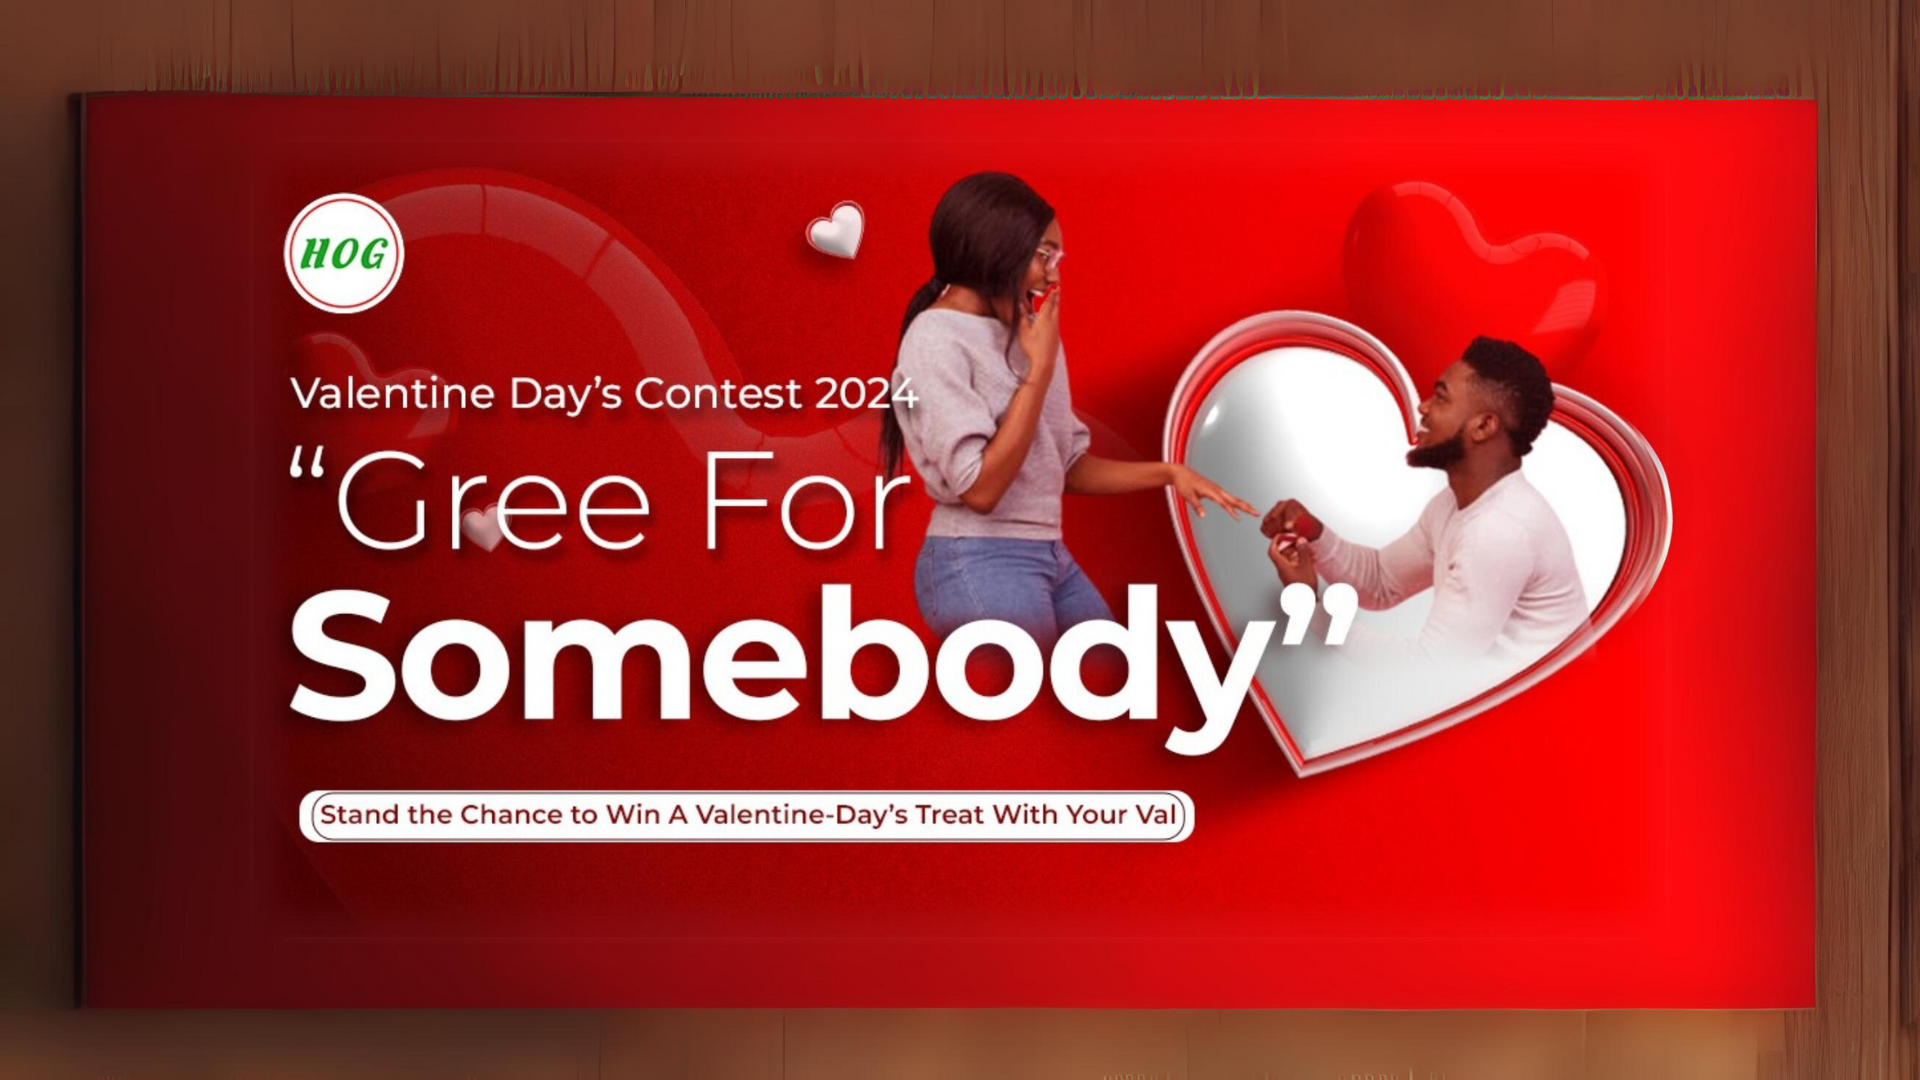 ENTER NOW TO WIN A VALENTINE'S DAY TREAT!